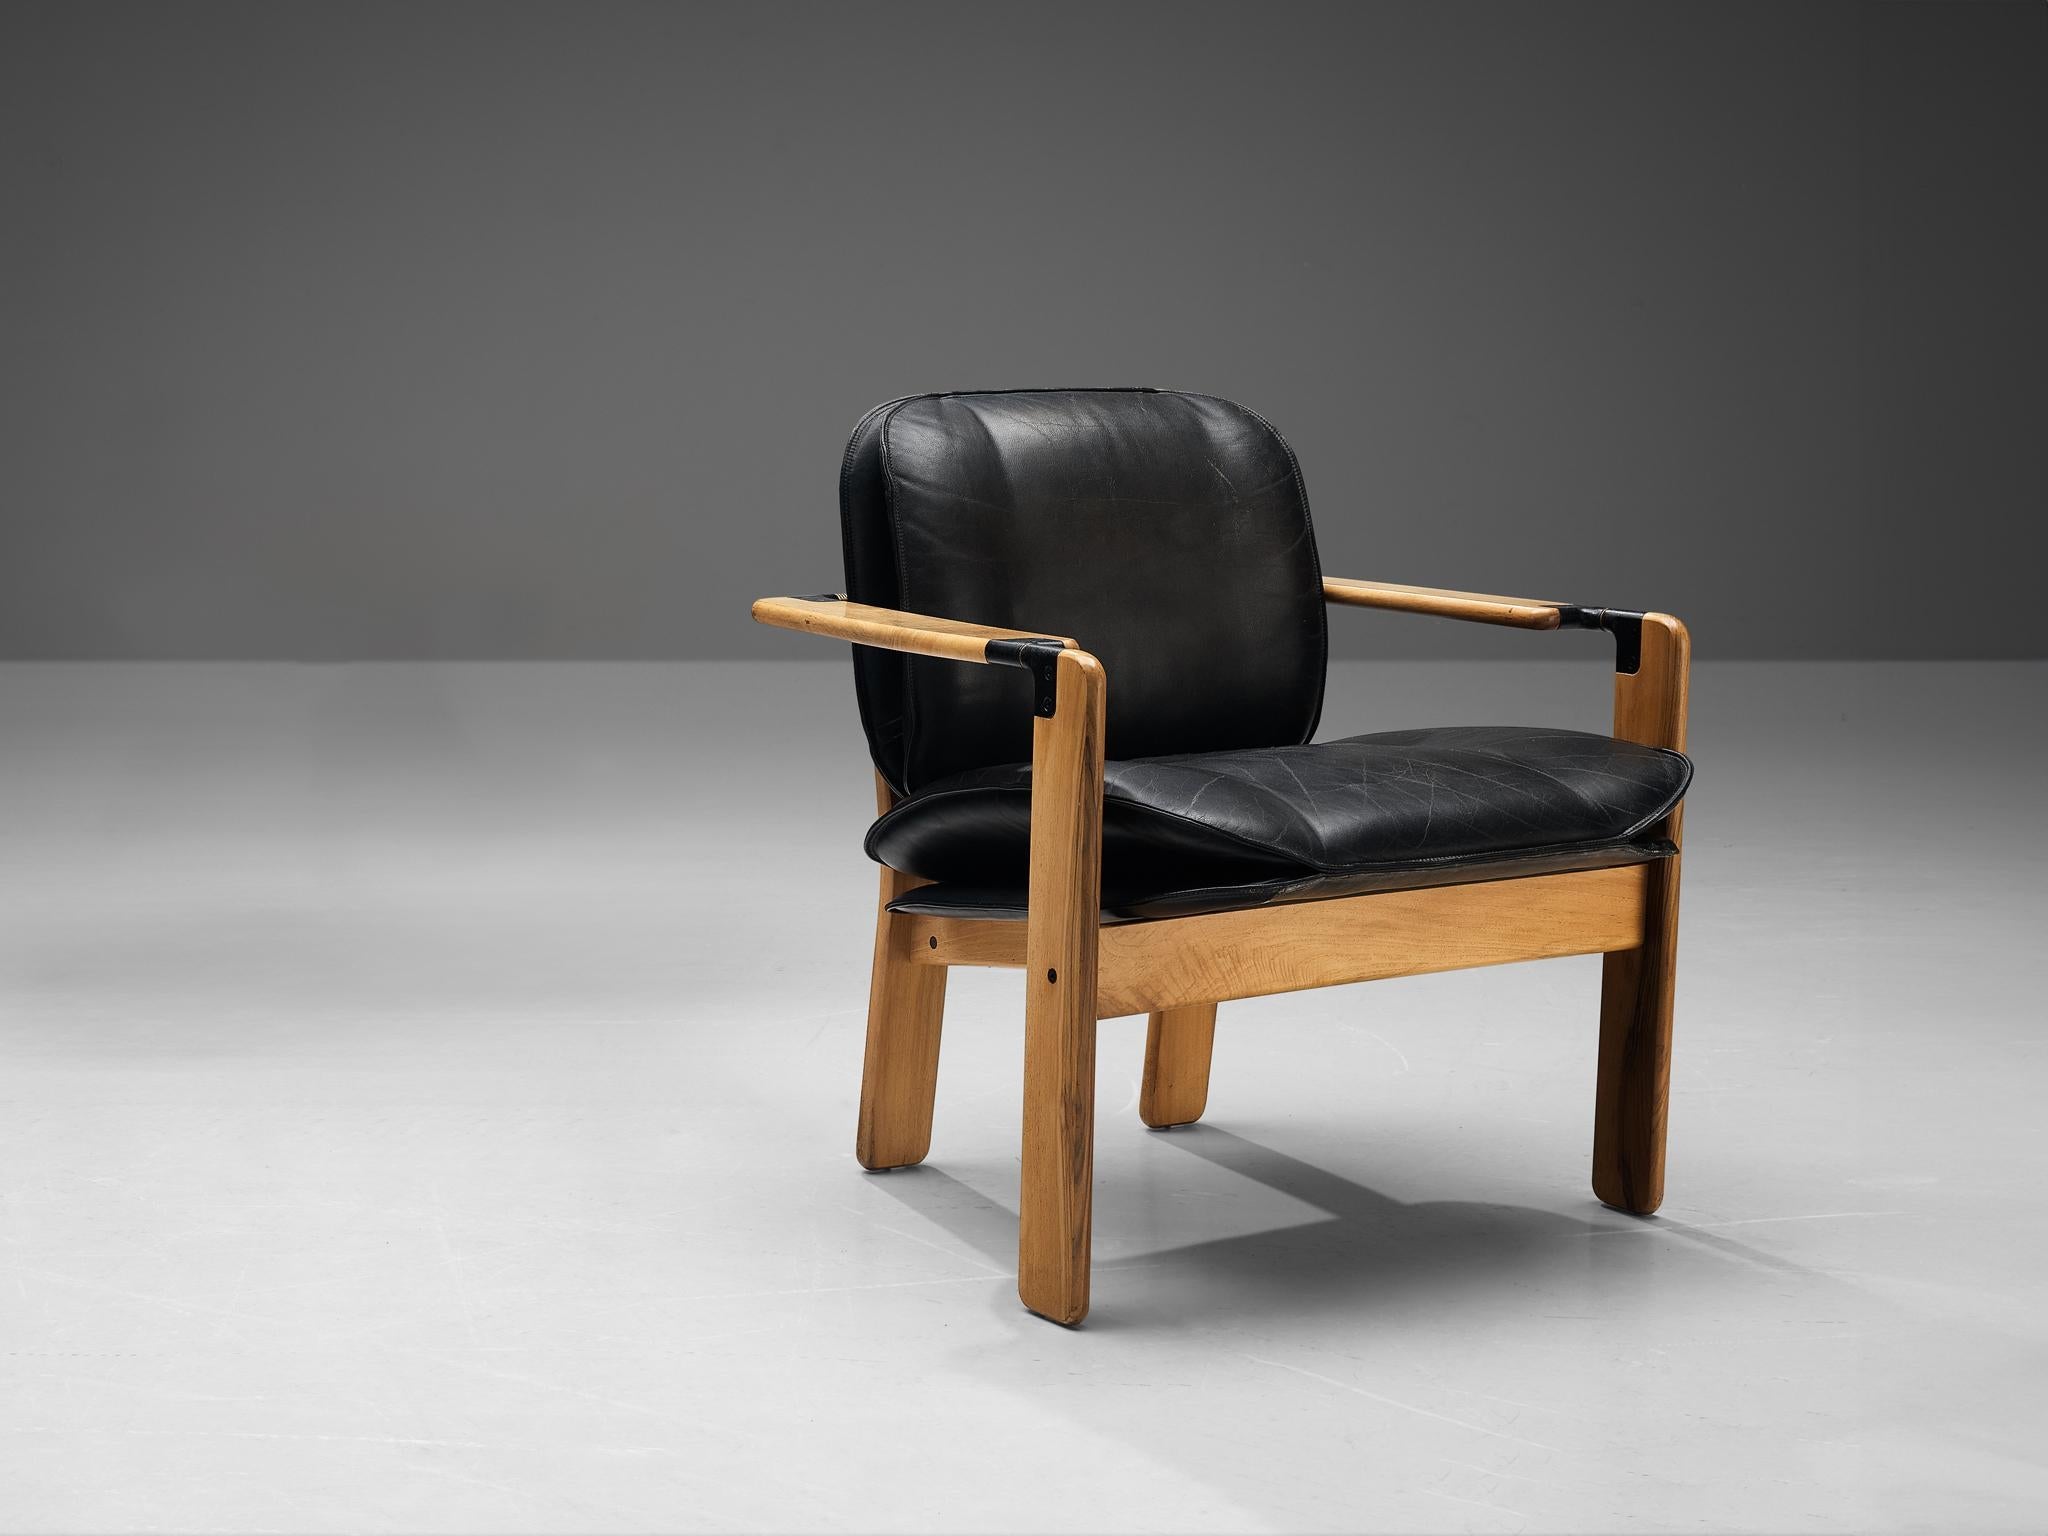 Franco Poli for Bernini 'Dueacca' Armchair in Walnut and Leather